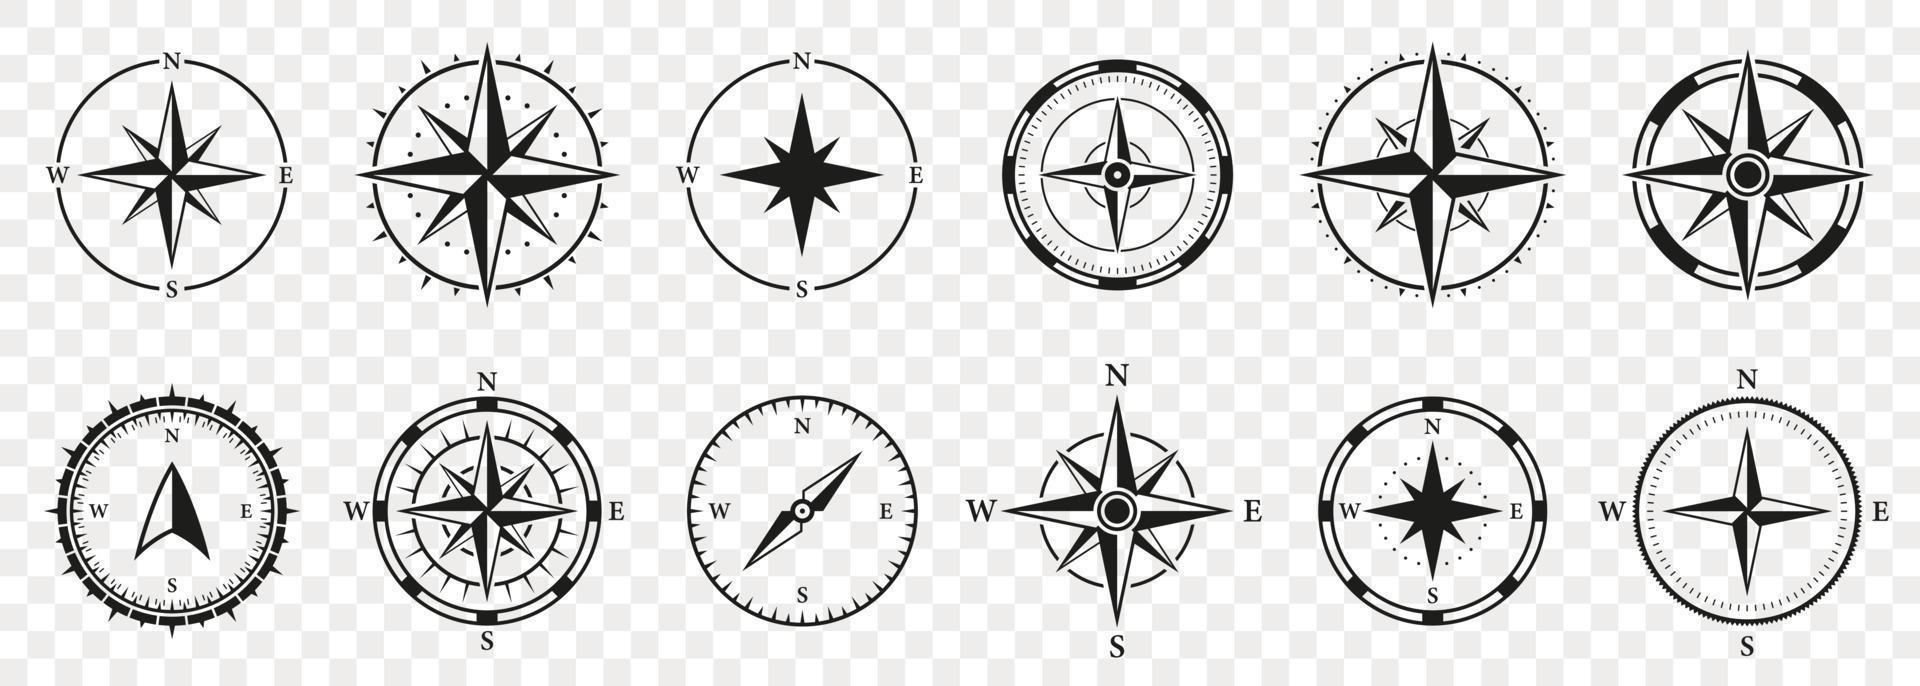 Windrose Silhouette Icon Set. Compass Nautical Navigator Cartography Glyph Pictogram. Rose Wind Navigator Icon. Adventure Direction to North South West East Sign. Isolated Vector Illustration.